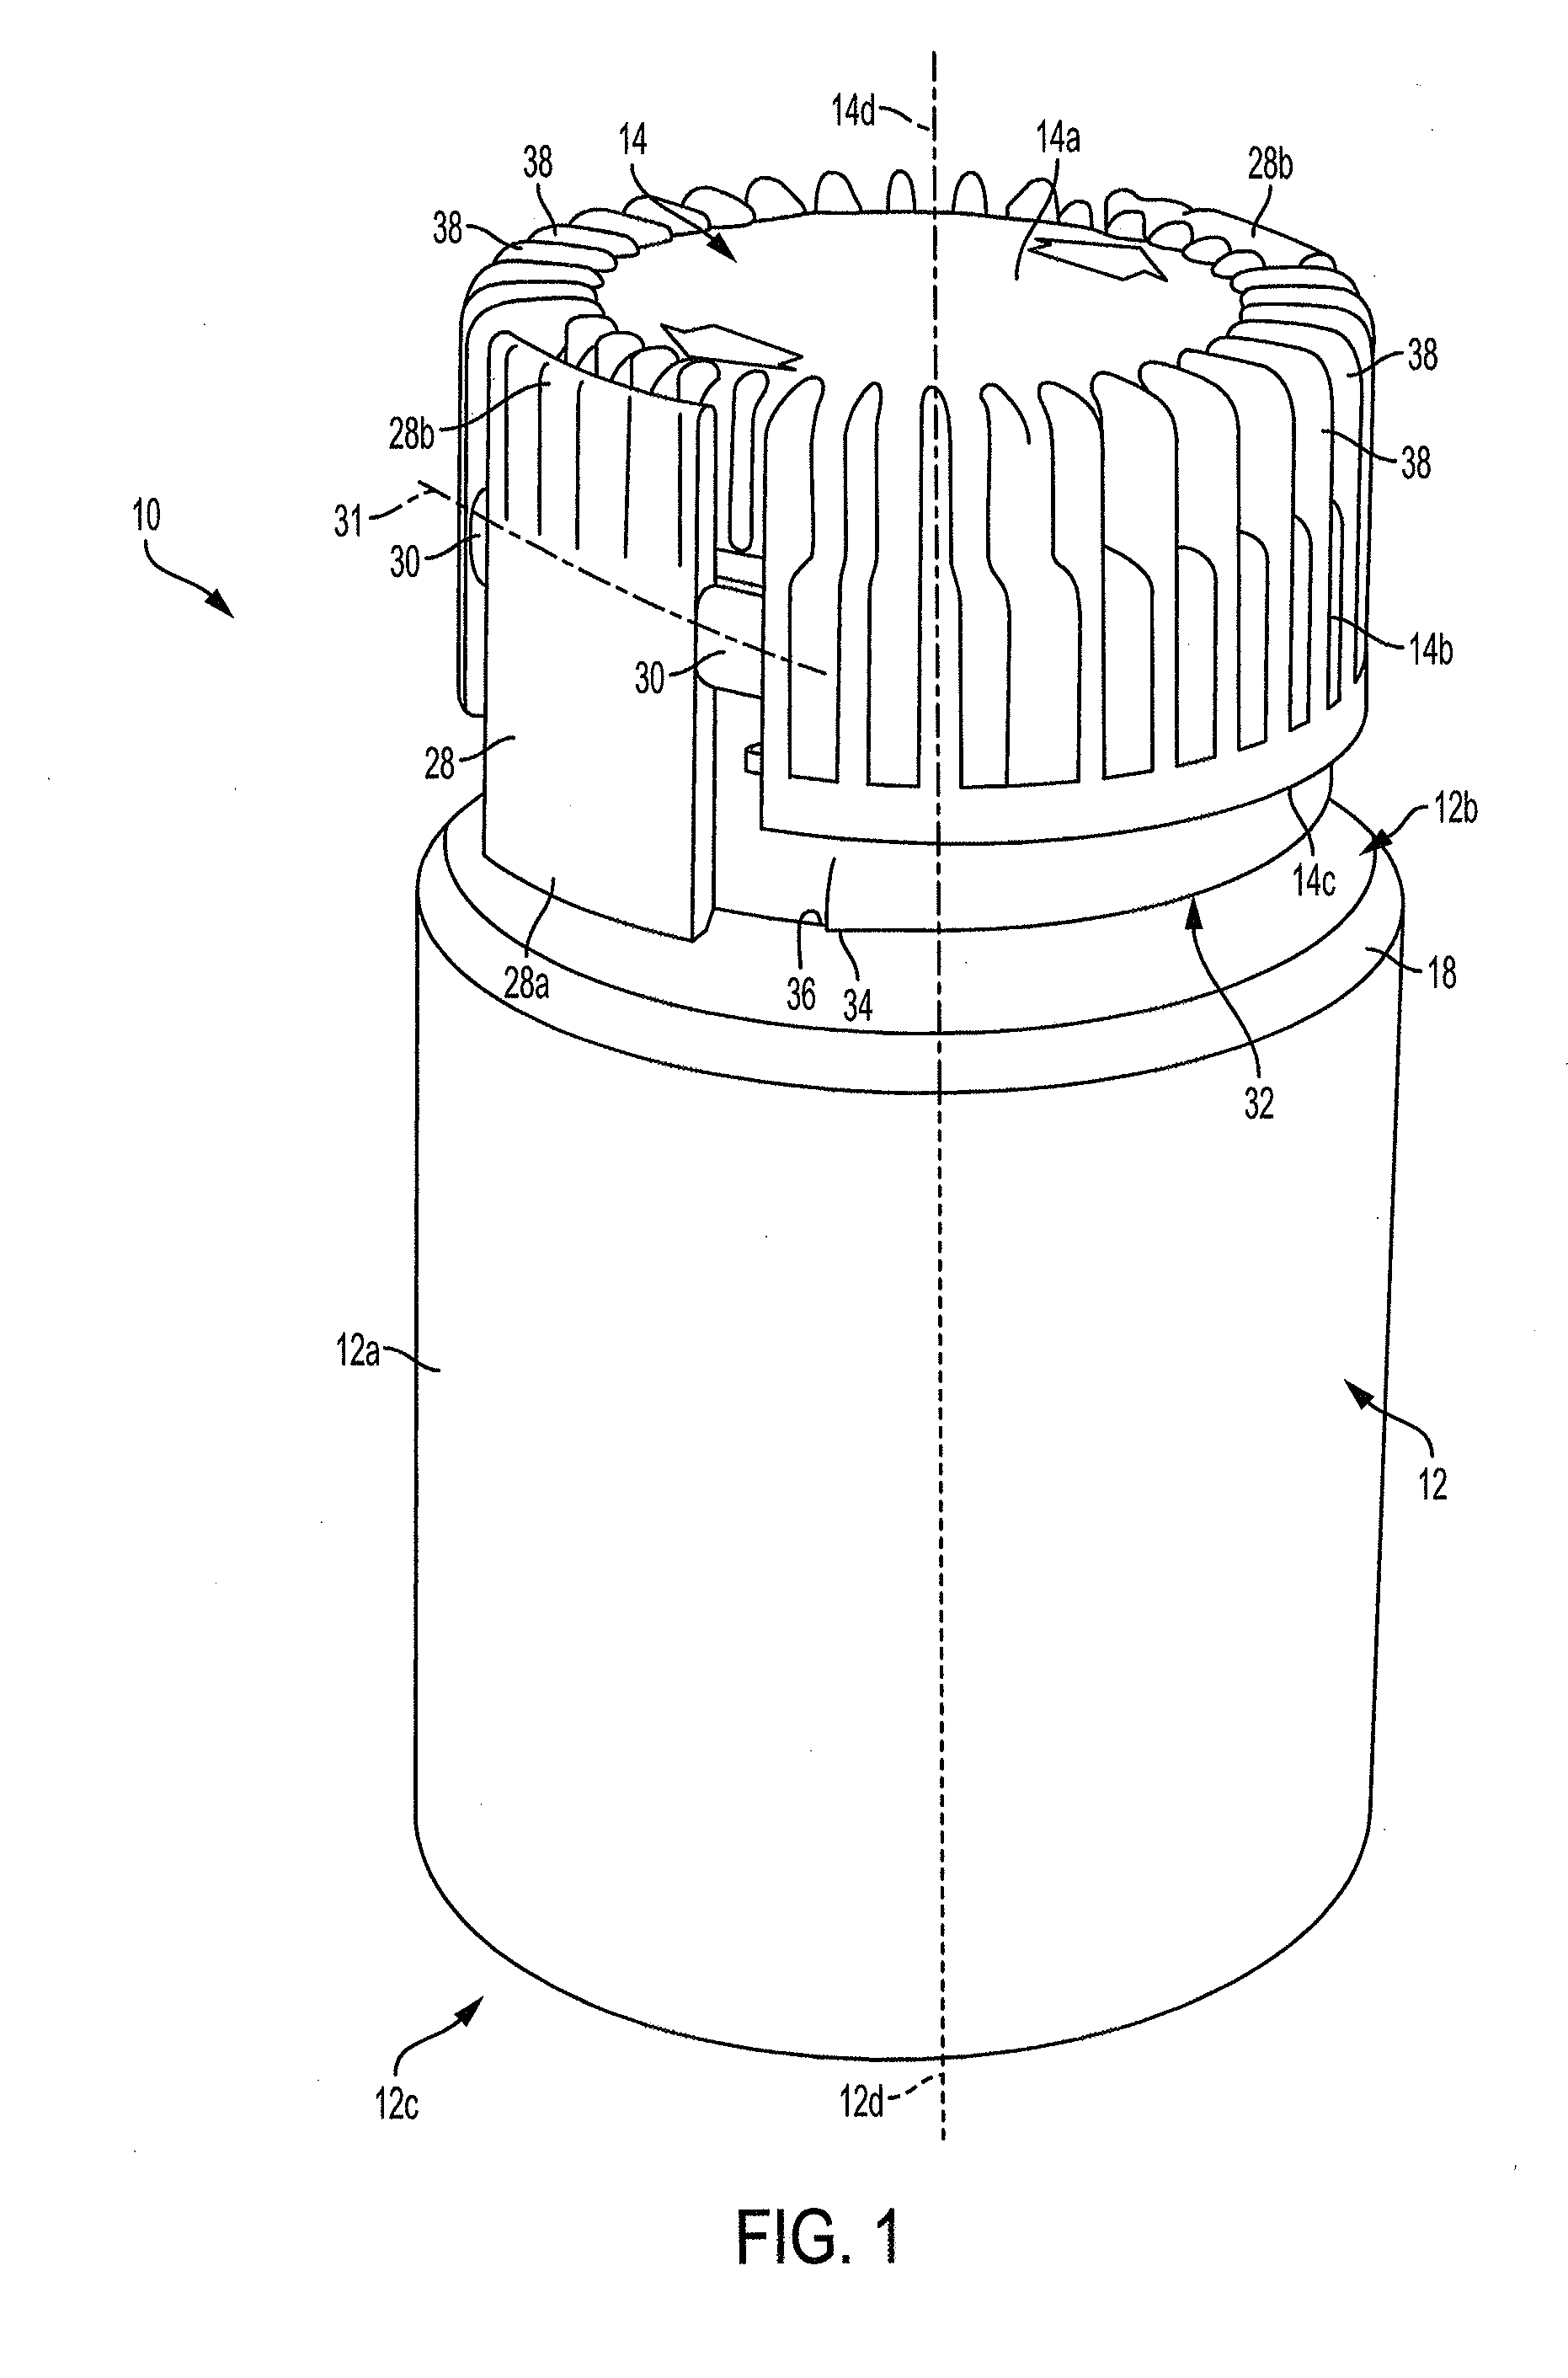 Child-resistant cap and container assembly